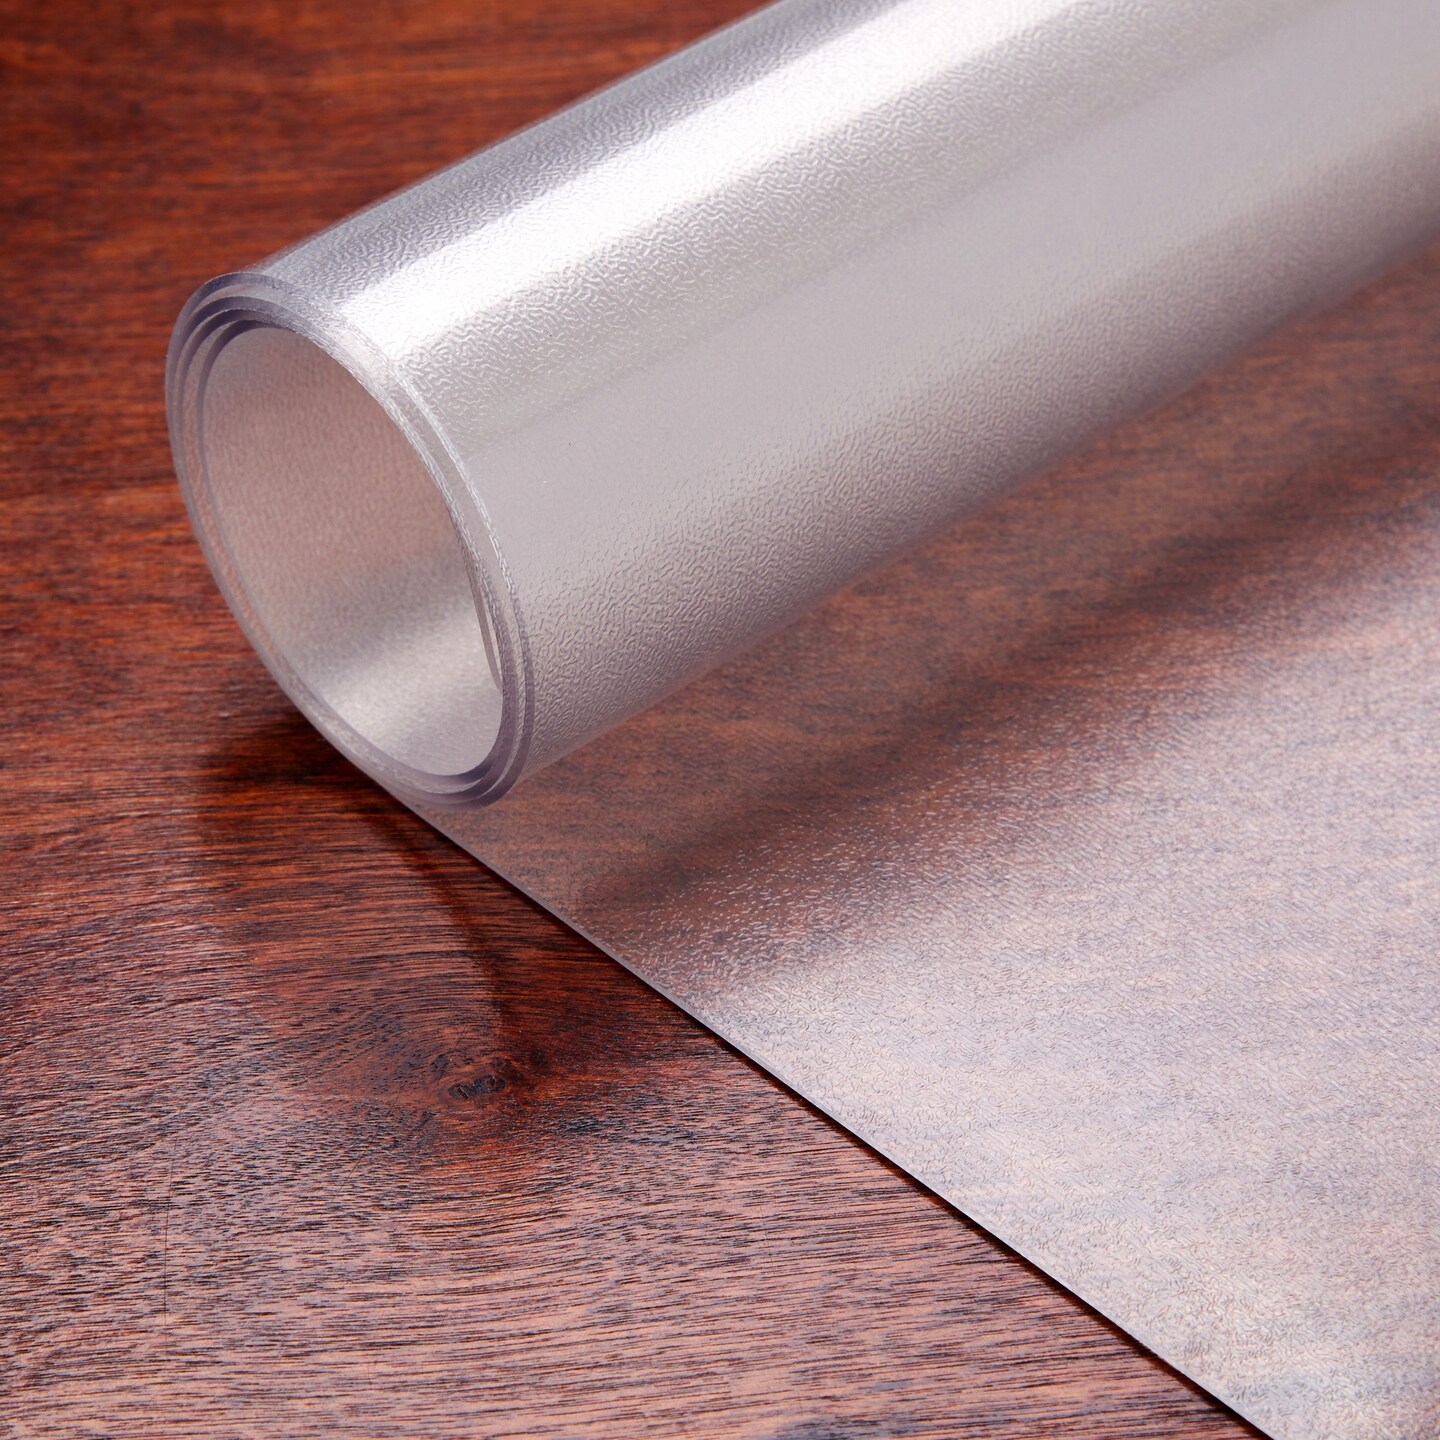 Clear Desk Pad for Craft Mats to Protect Table 1.5mm Thick Desk